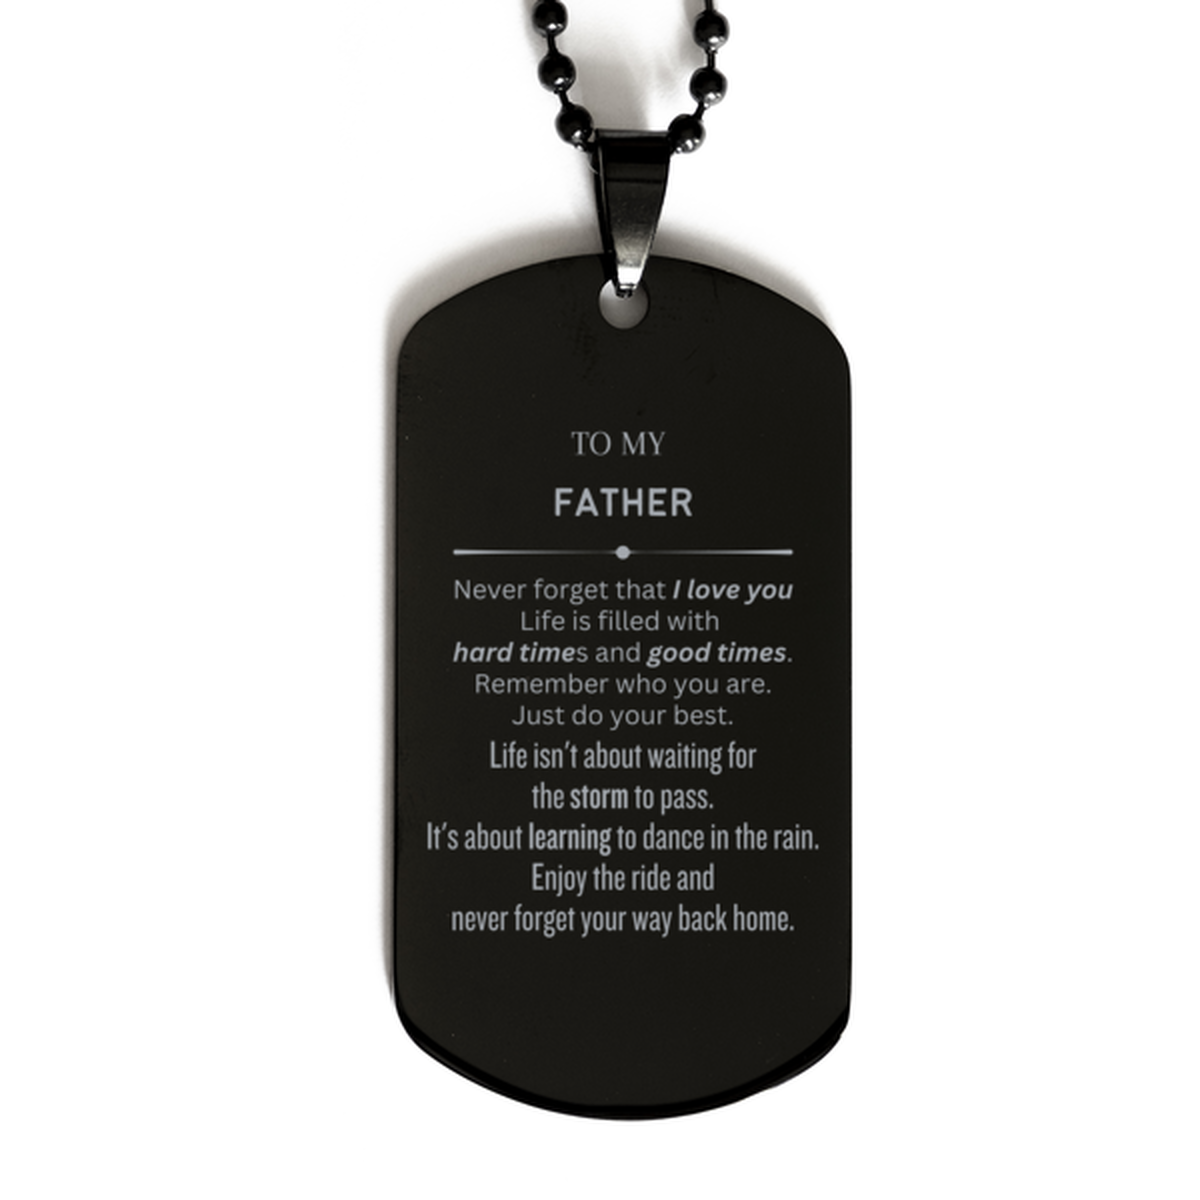 Christmas Father Black Dog Tag Gifts, To My Father Birthday Thank You Gifts For Father, Graduation Unique Gifts For Father To My Father Never forget that I love you life is filled with hard times and good times. Remember who you are. Just do your best